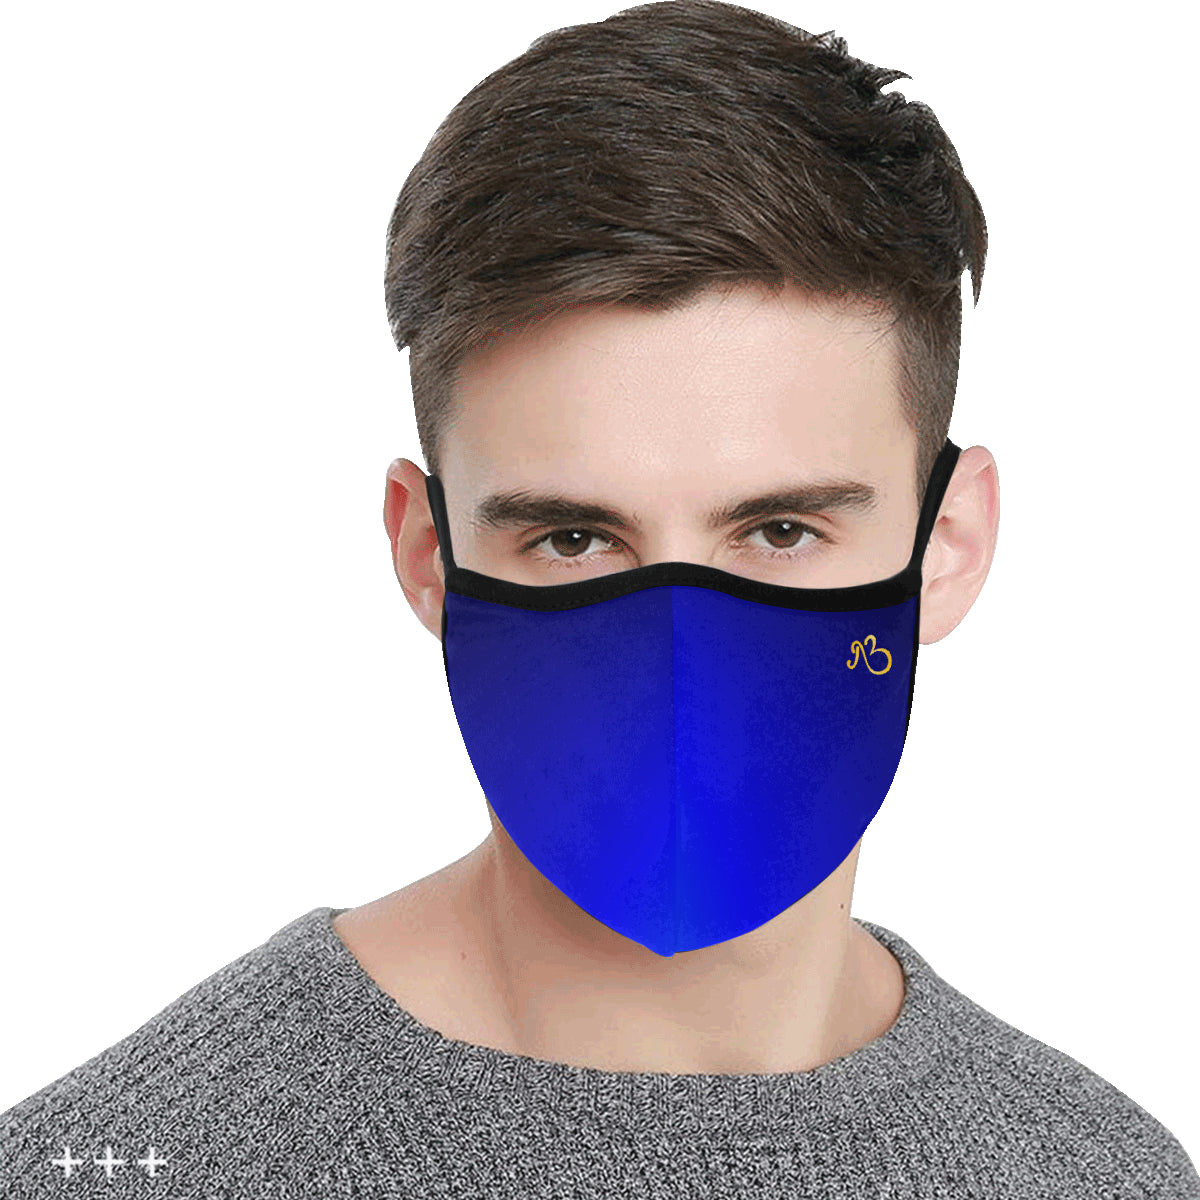 flyersetcinc Sky Galaxy Cotton Fabric Face Mask with filter slot (30 Filters Included) - Non-medical use